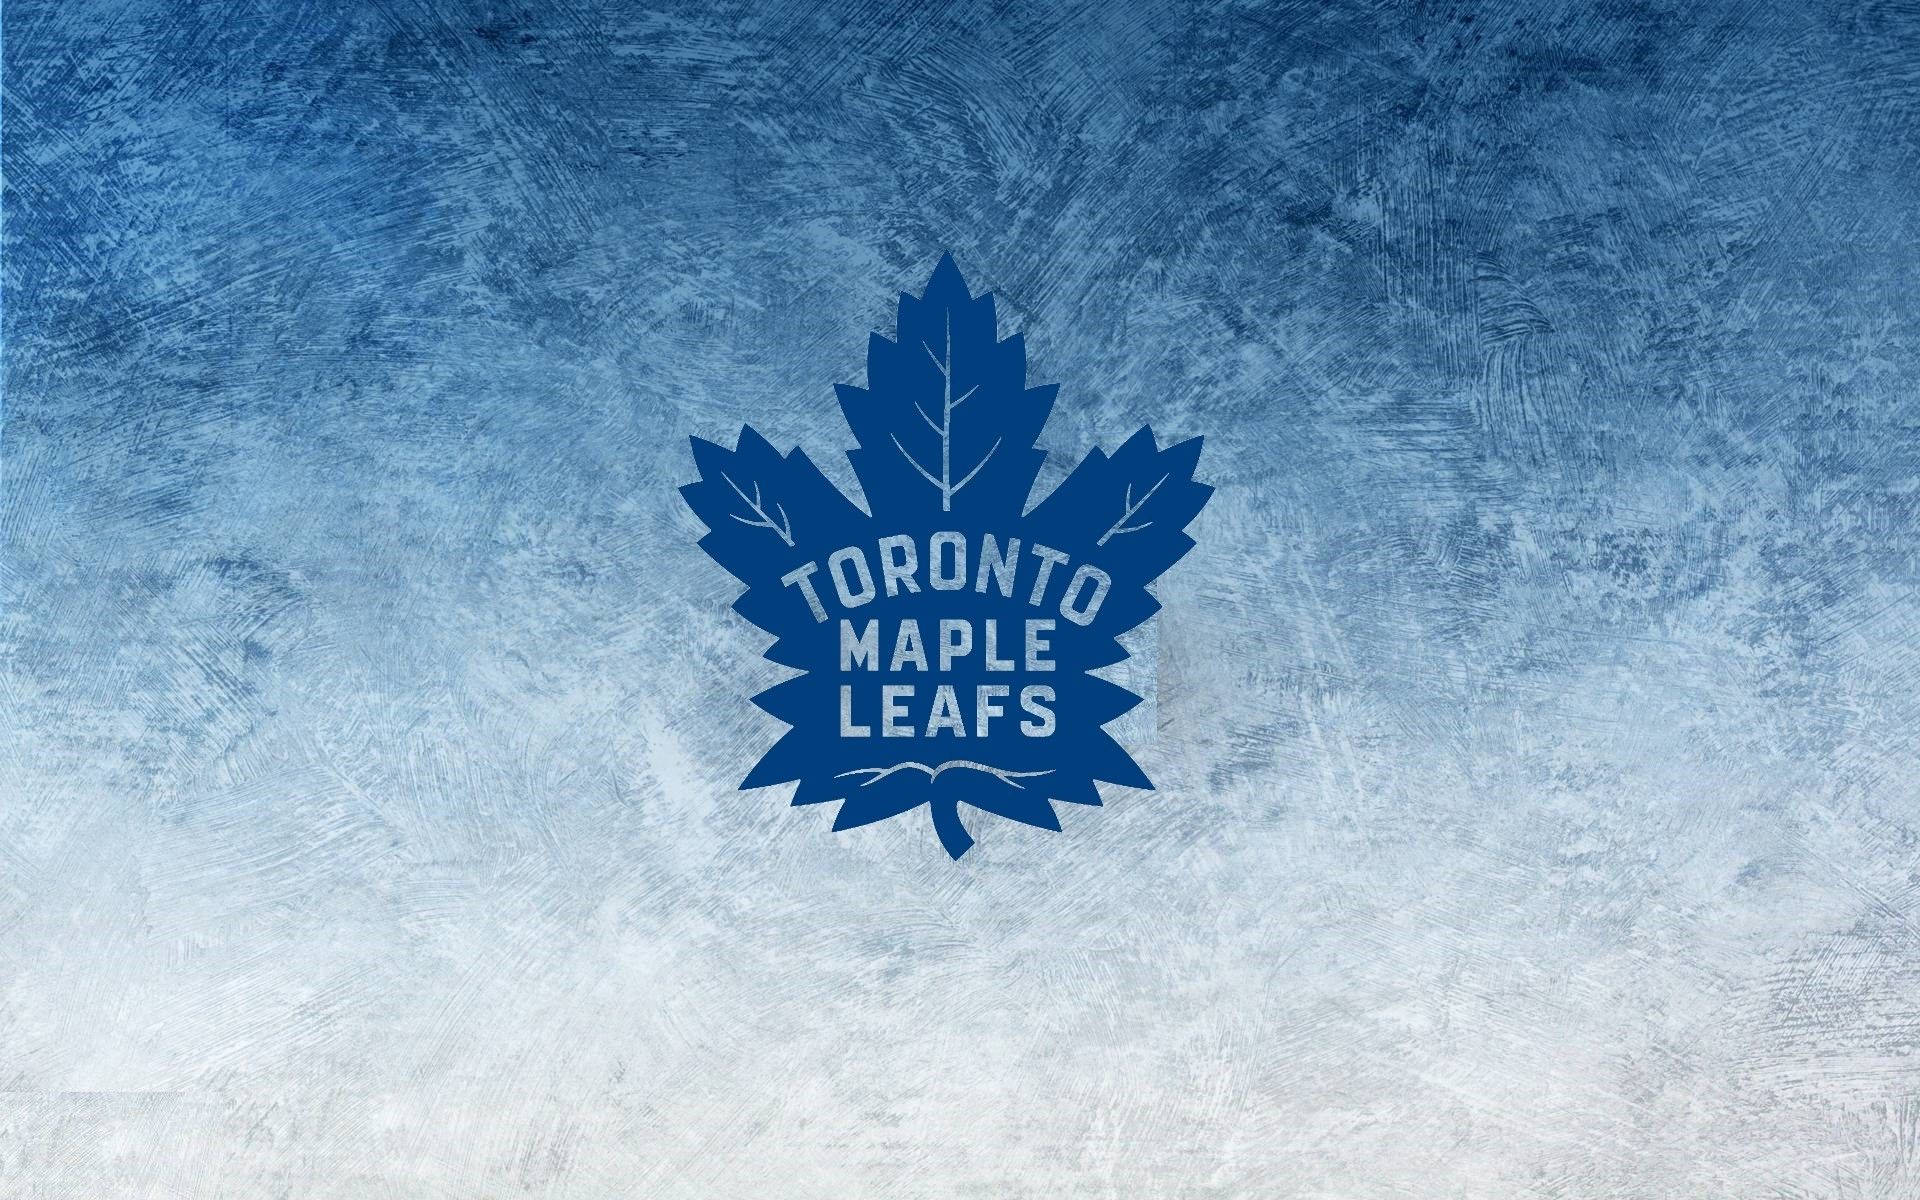 Toronto Maple Leafs Logo Icy Graphic Wallpaper